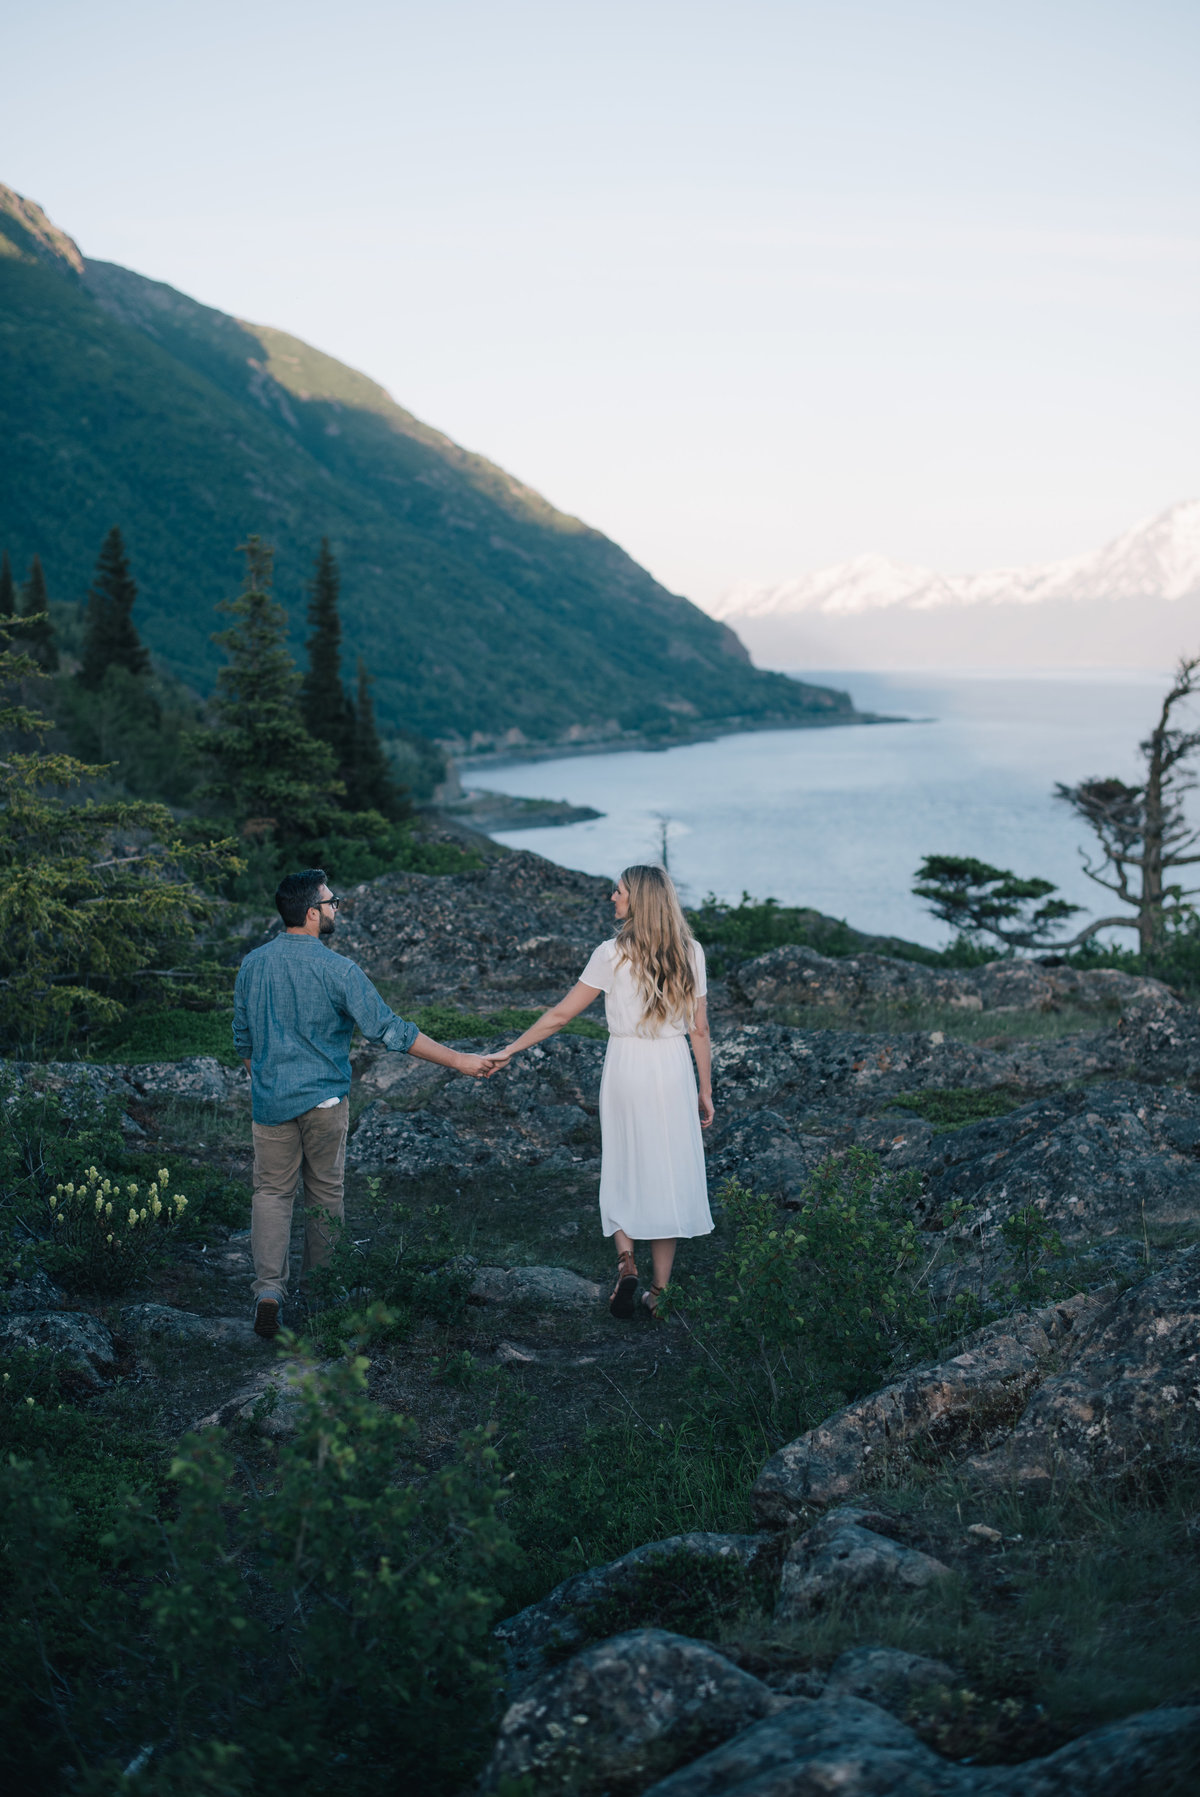 027_Erica Rose Photography_Anchorage Engagement Photographer_Featured